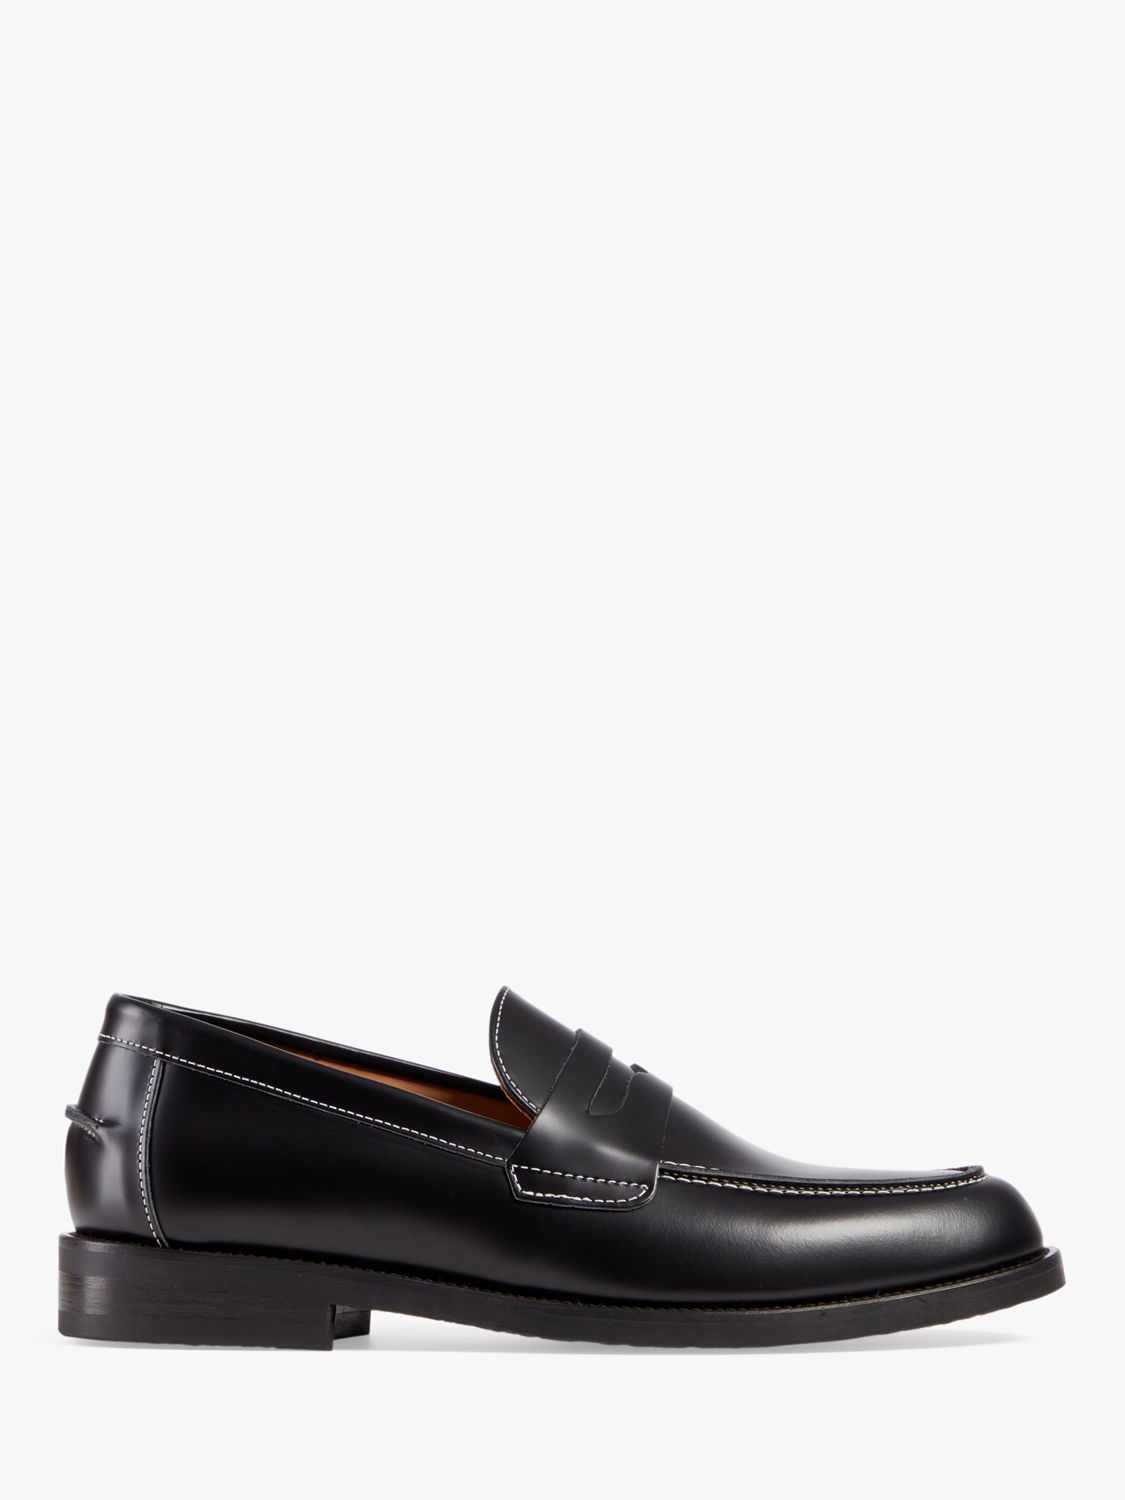 Duke + Dexter Wilde Leather Penny Loafers, Black at John Lewis & Partners